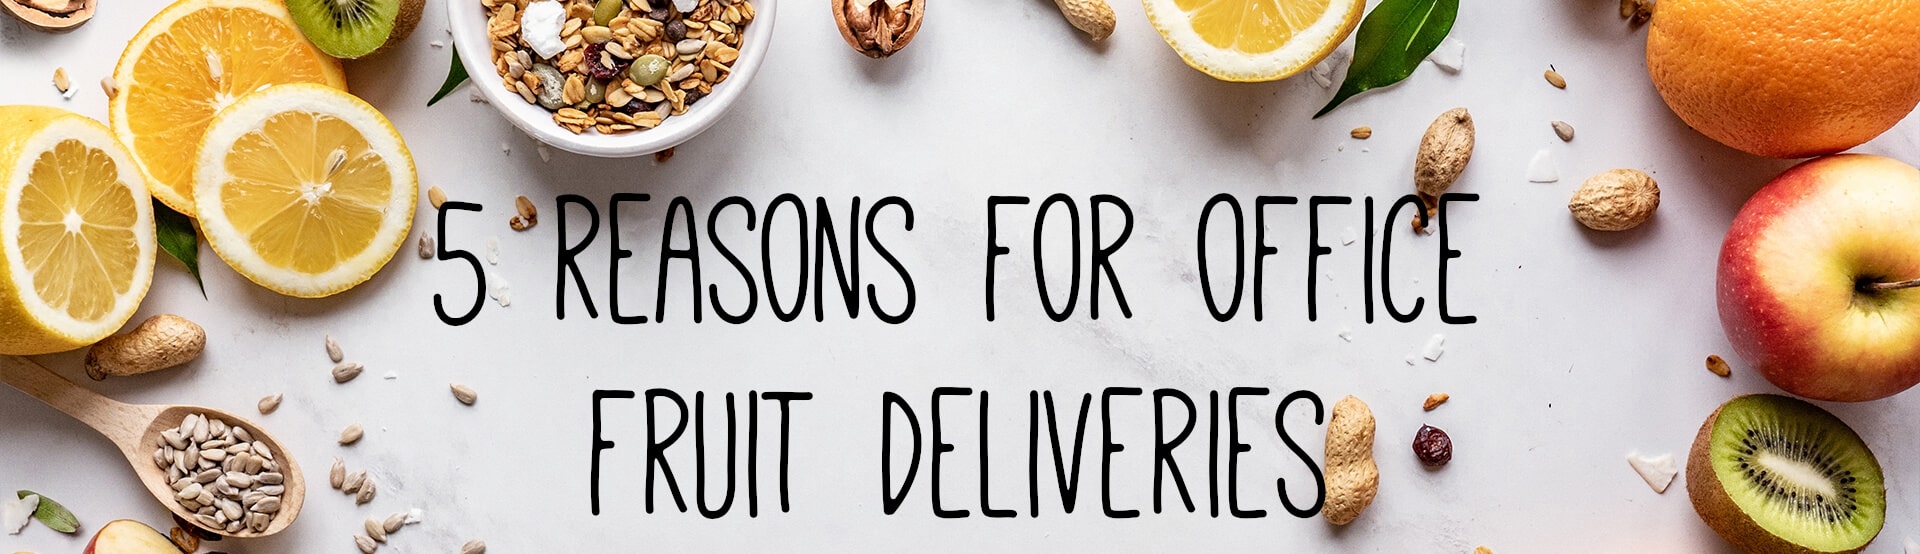 5 Reasons to get fruit delivered to your office